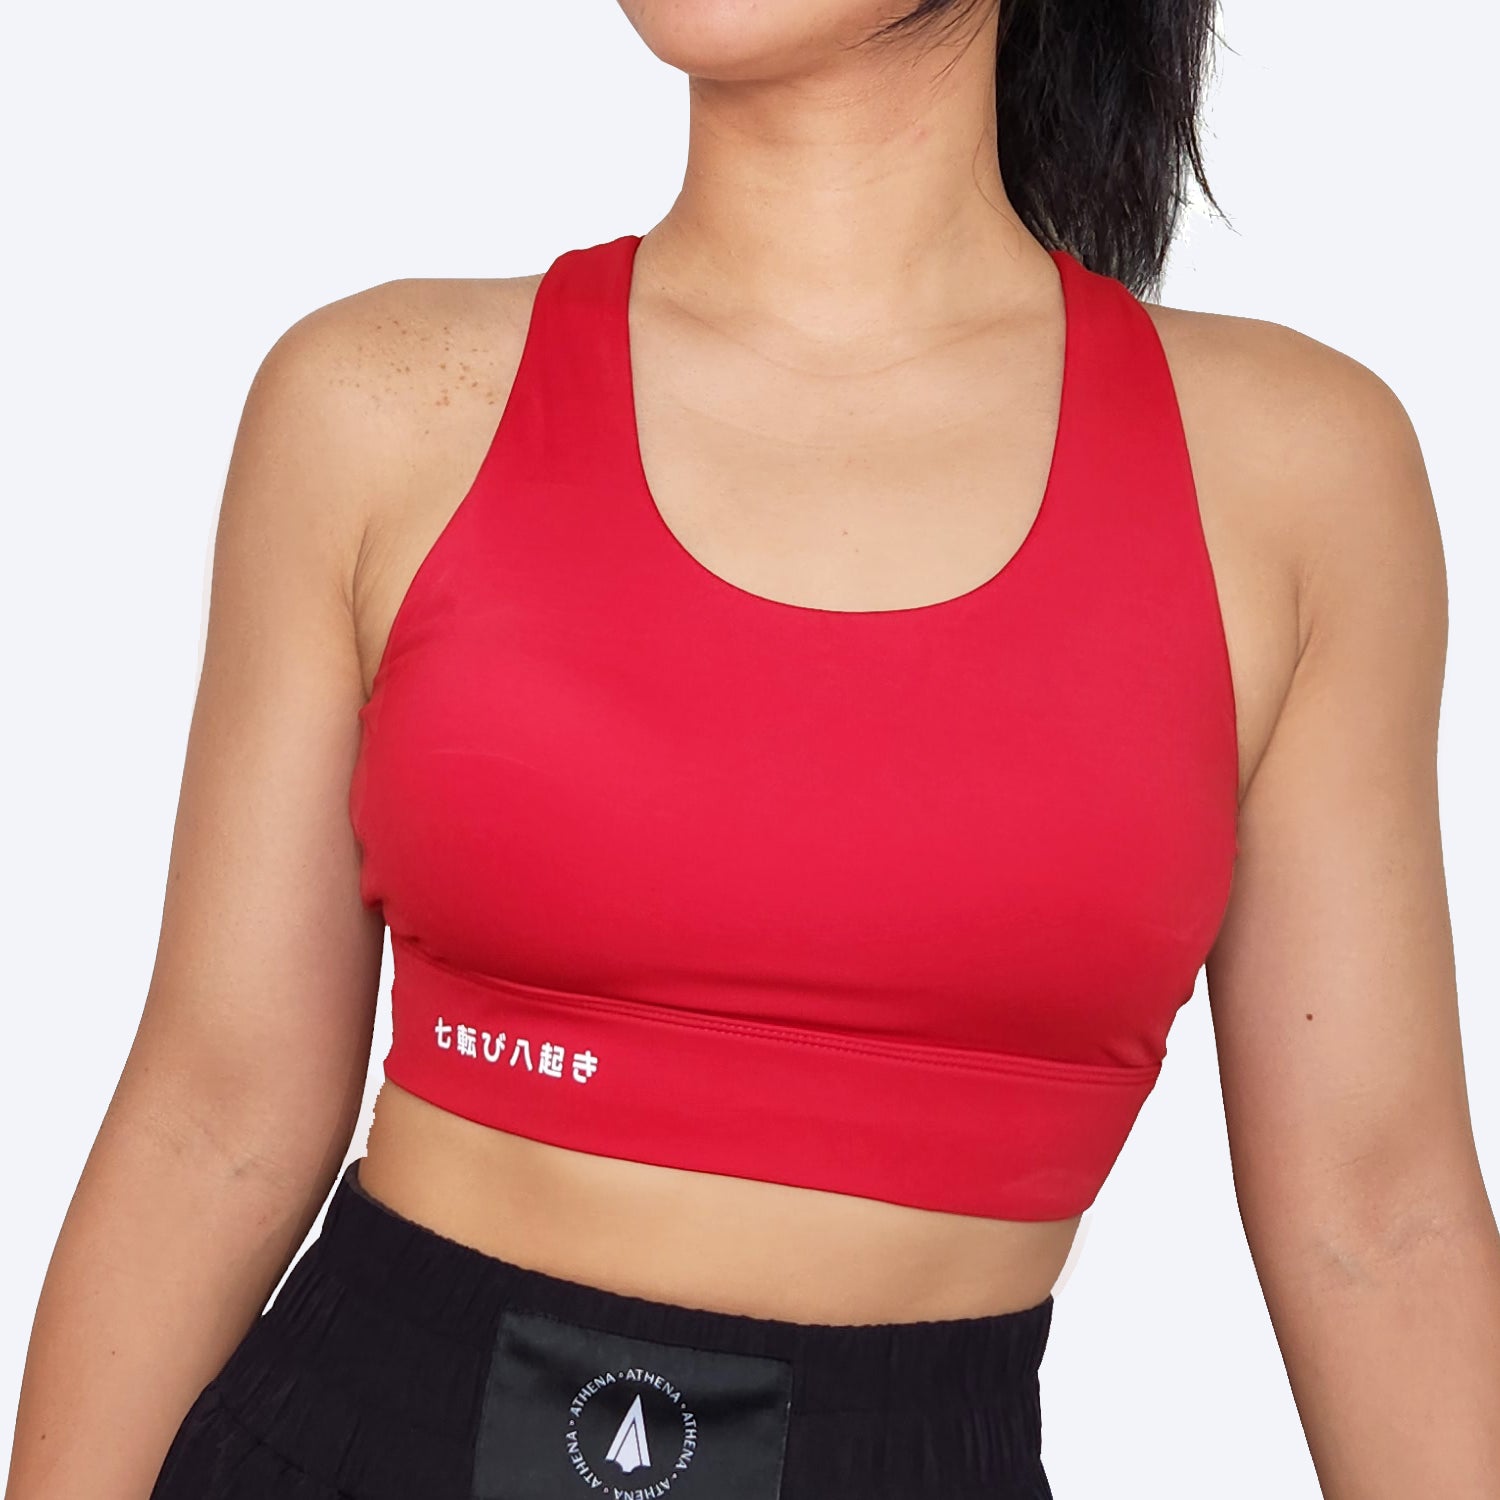 Athena Fightwear Theia Sports Bra (Red) for women's boxing, muay thai,  kickboxing, BJJ and MMA with japanese proverb